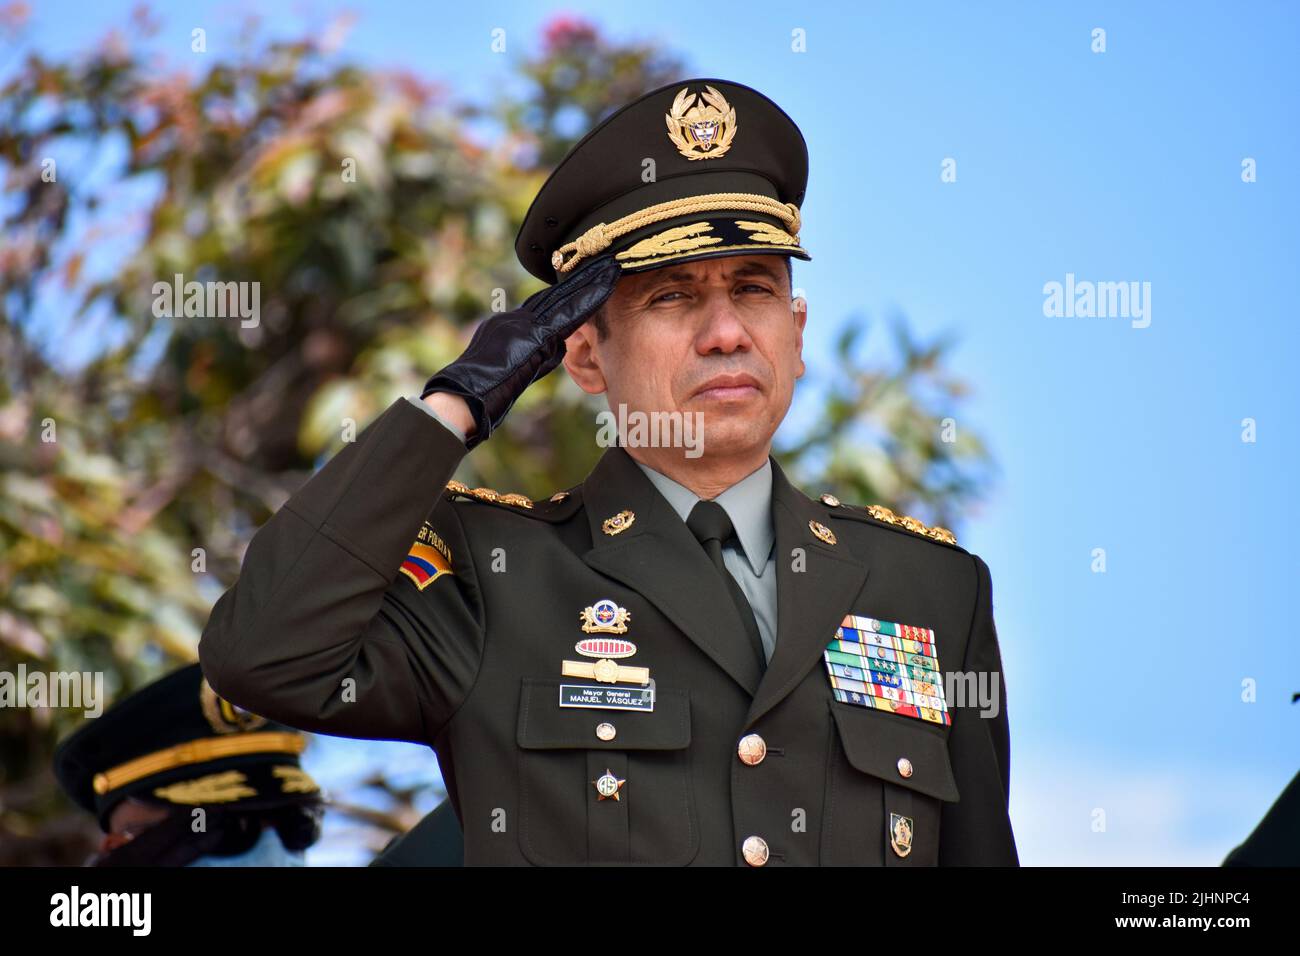 Bogota, Colombia, July 19, 2022. Colombia's police mayor general Manuel Antionio Vasquez is seen during the ceremony of honors to families of fallen military members in Combat prior to the Colombia's independence day parade that takes place on july 20, in Bogota, Colombia, July 19, 2022. Photo by: Cristian Bayona/Long Visual Press Stock Photo